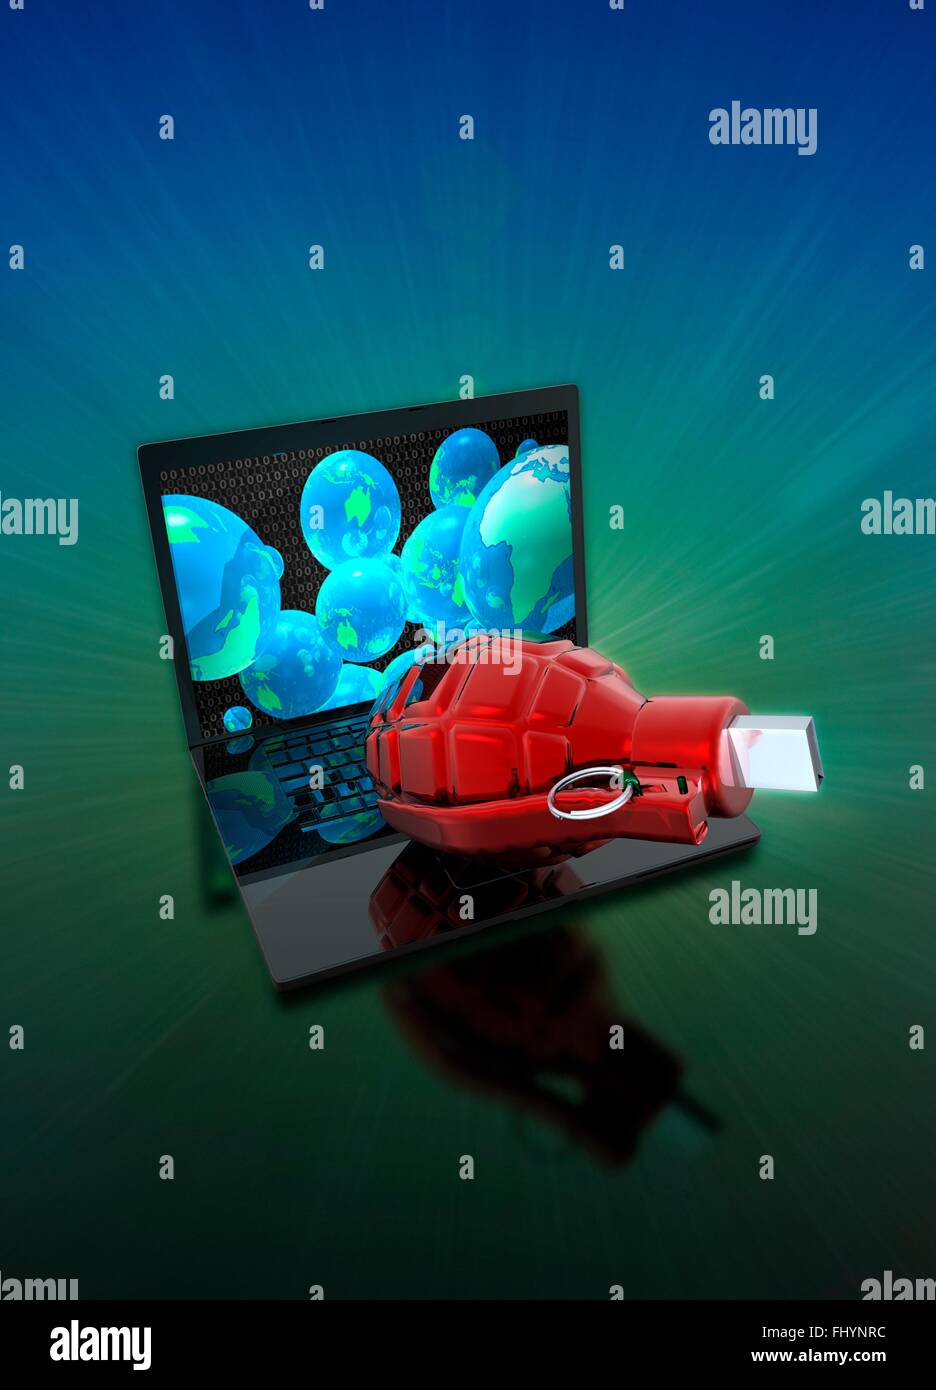 Laptop with grenade and usb device, illustration. Stock Photo